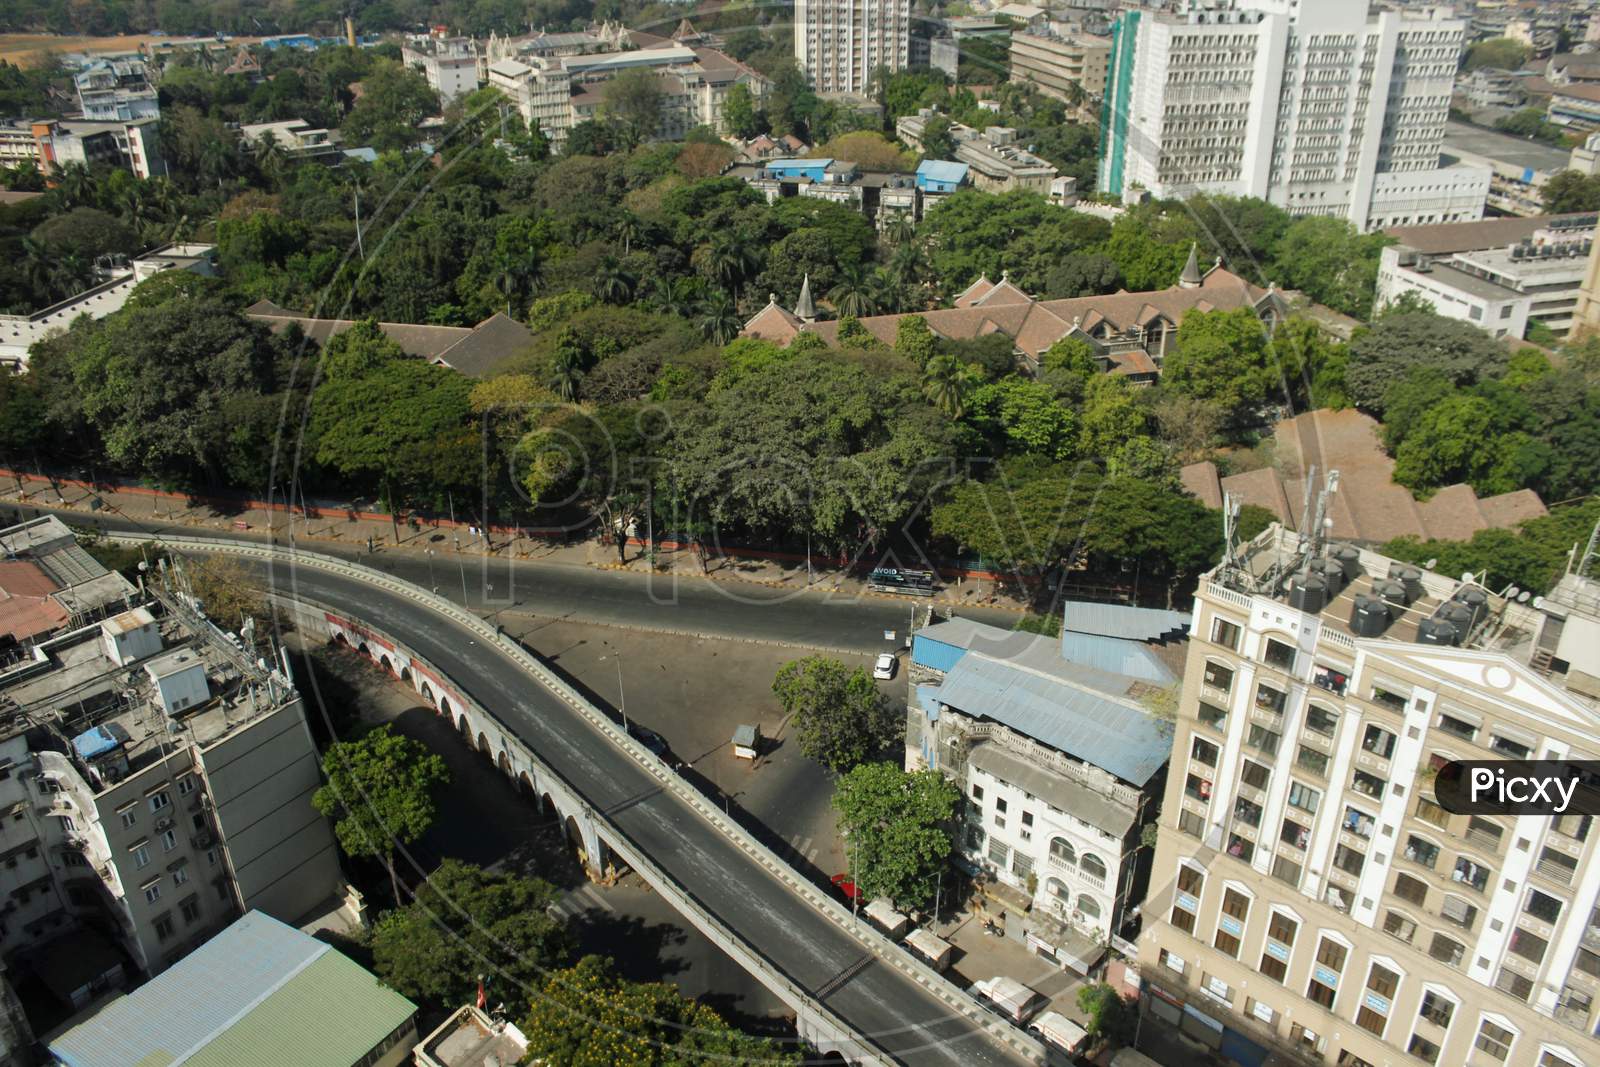 A view shows an empty road during a 14-hour long curfew to limit the spreading of coronavirus disease (COVID-19) in the country, in Mumbai, India, March 22, 2020.